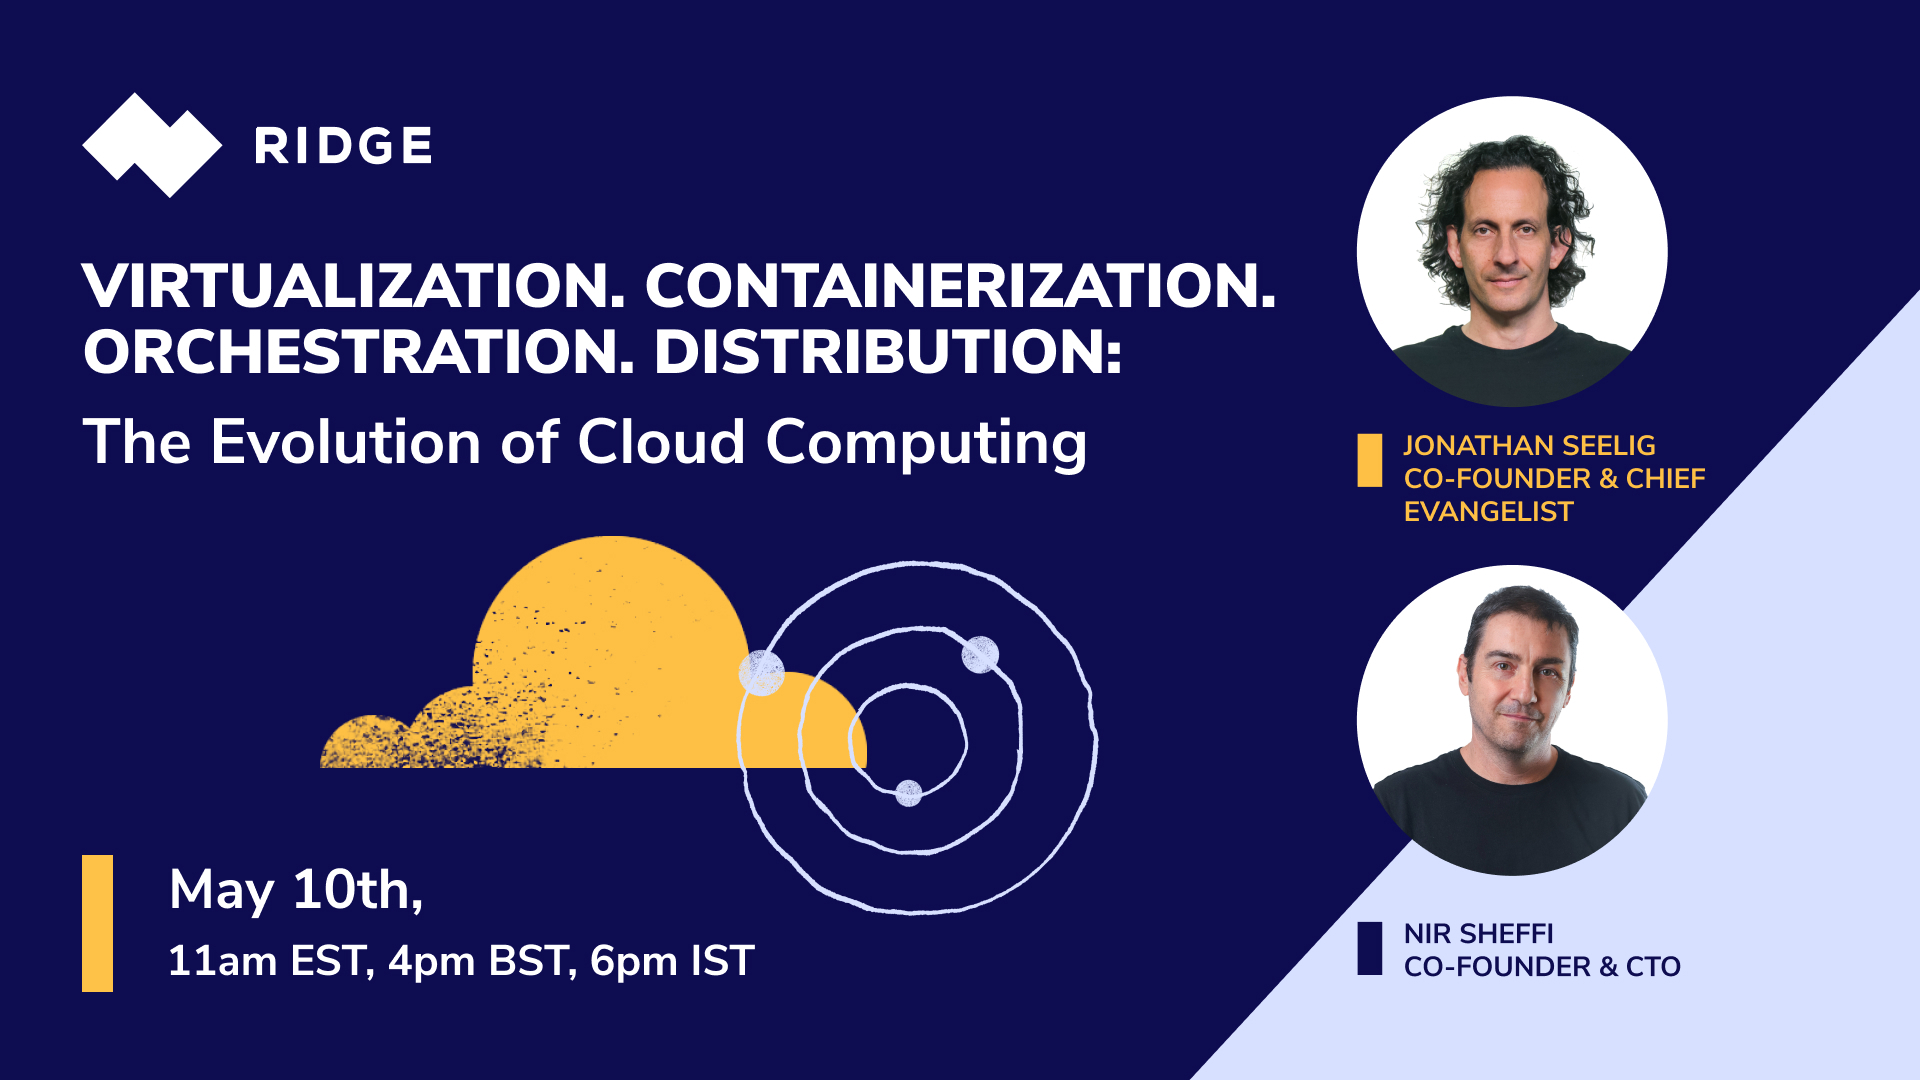 Virtualization. Containerization. Orchestration. Distribution: The Evolution of Cloud Computing